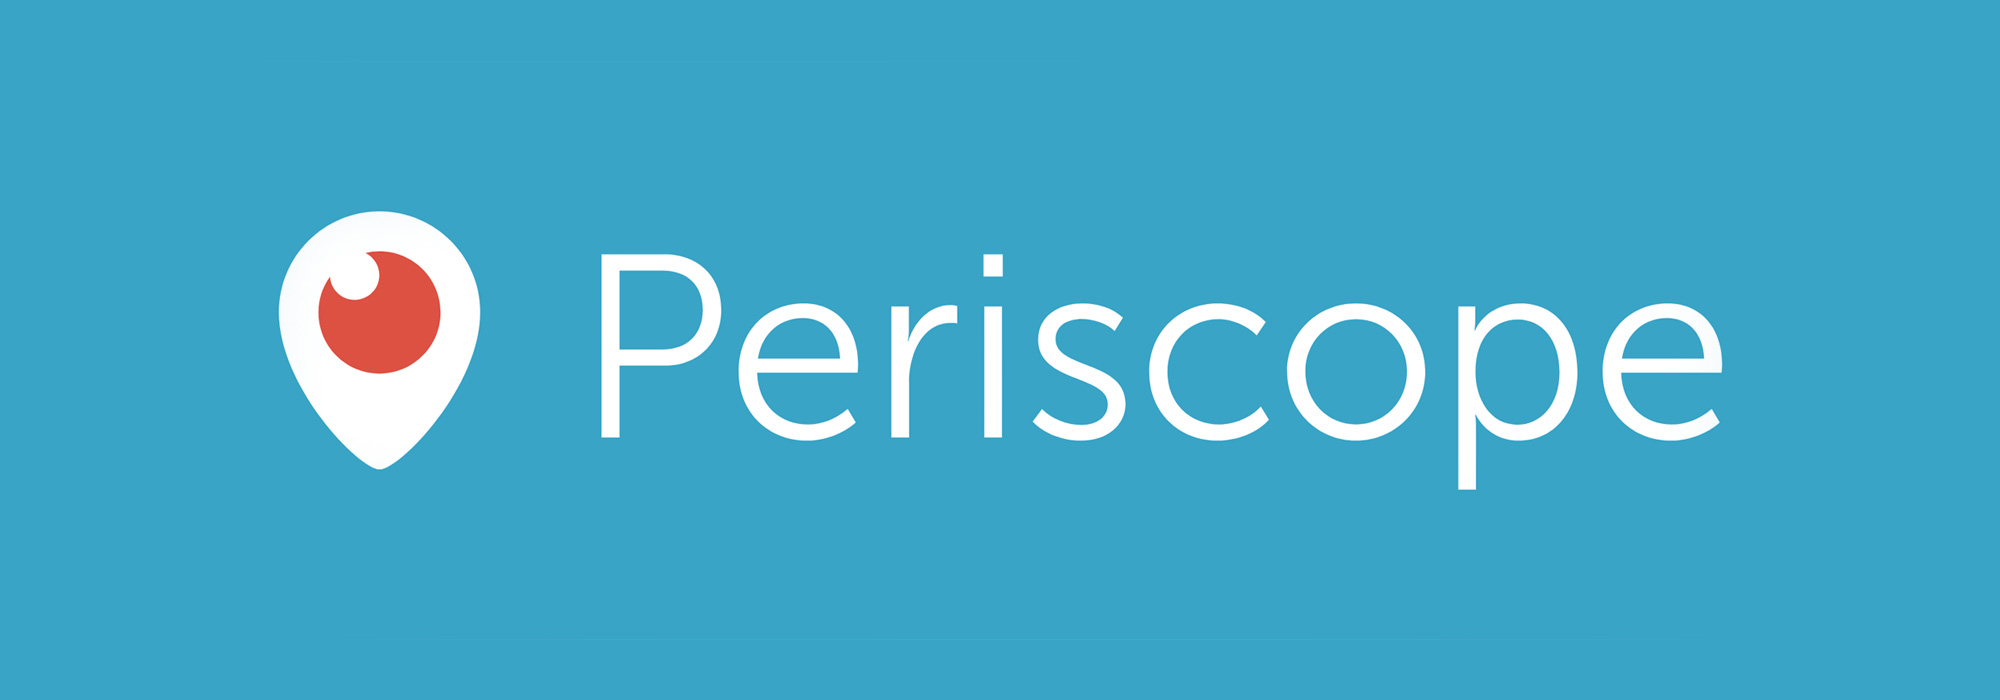 Twitter's Periscope: A New Way to Build Your Brand